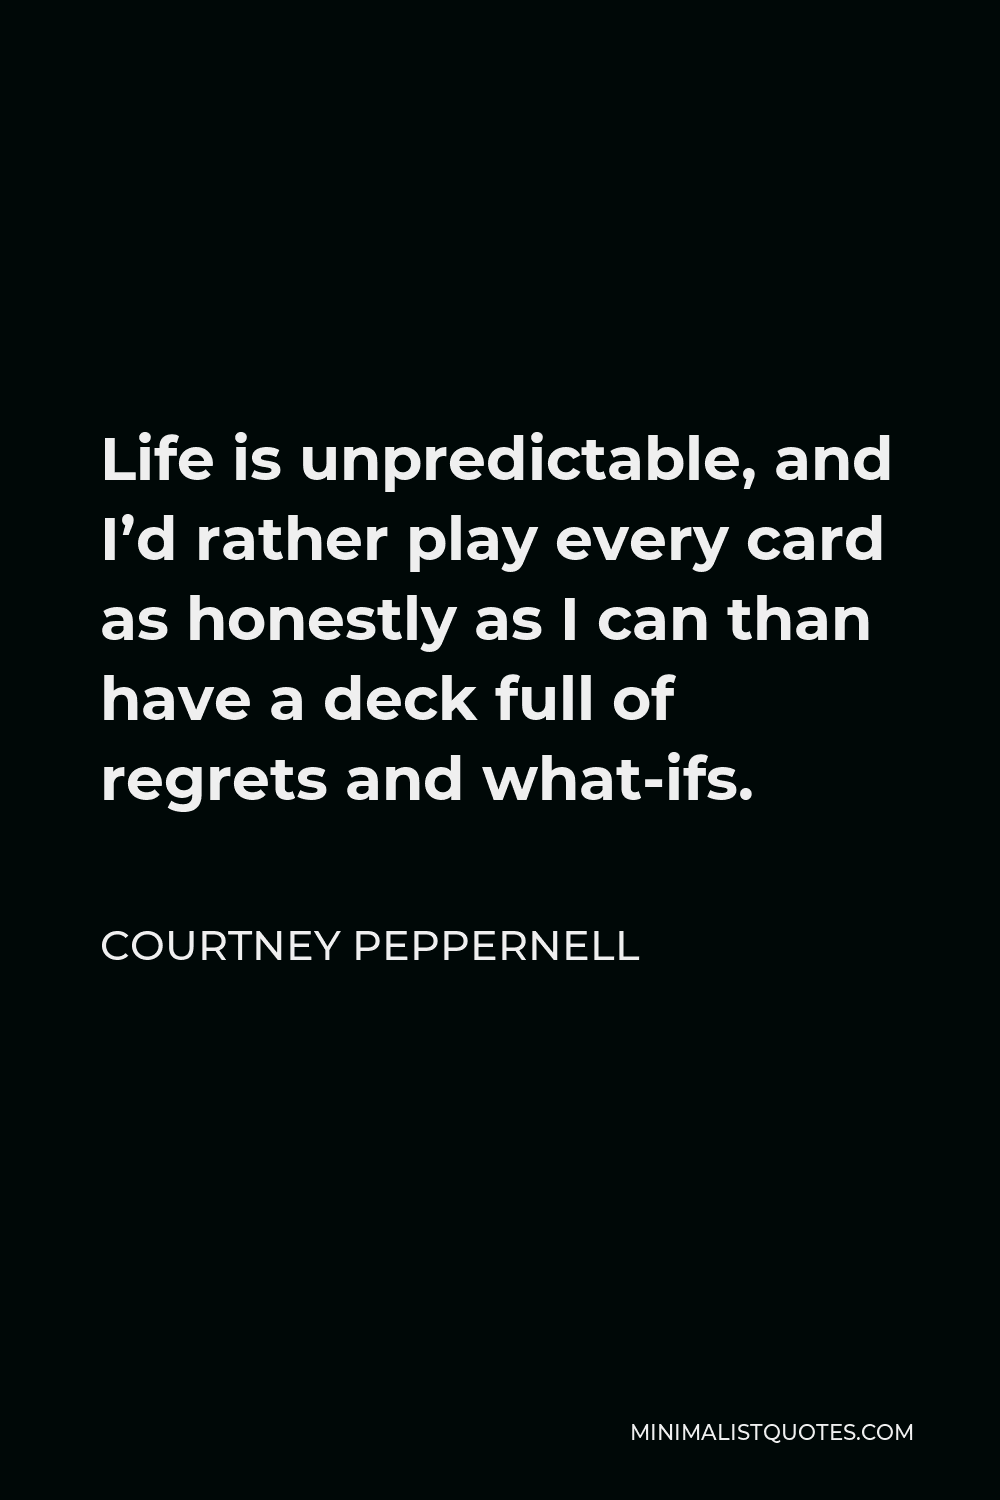 Courtney Peppernell Quote - Life is unpredictable, and I’d rather play every card as honestly as I can than have a deck full of regrets and what-ifs.